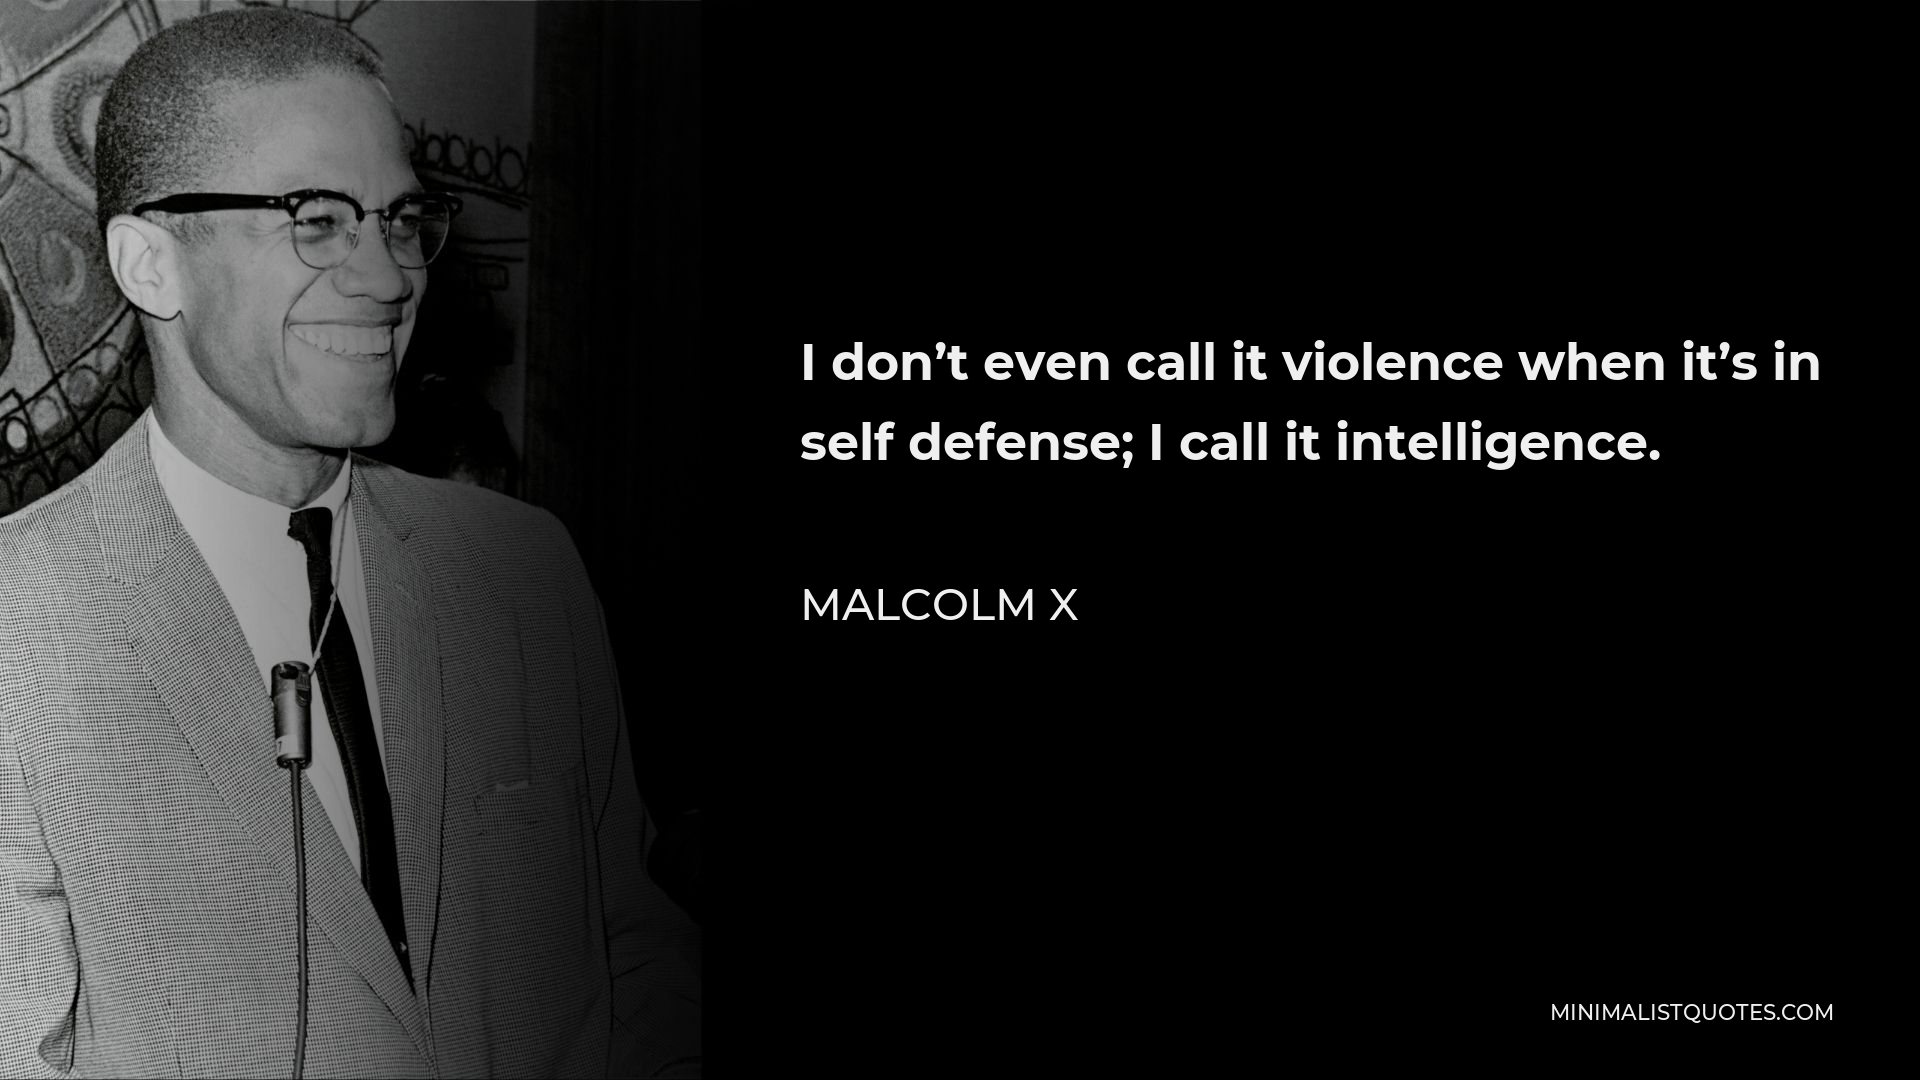 Malcolm X Quote - I don’t even call it violence when it’s in self defense; I call it intelligence.